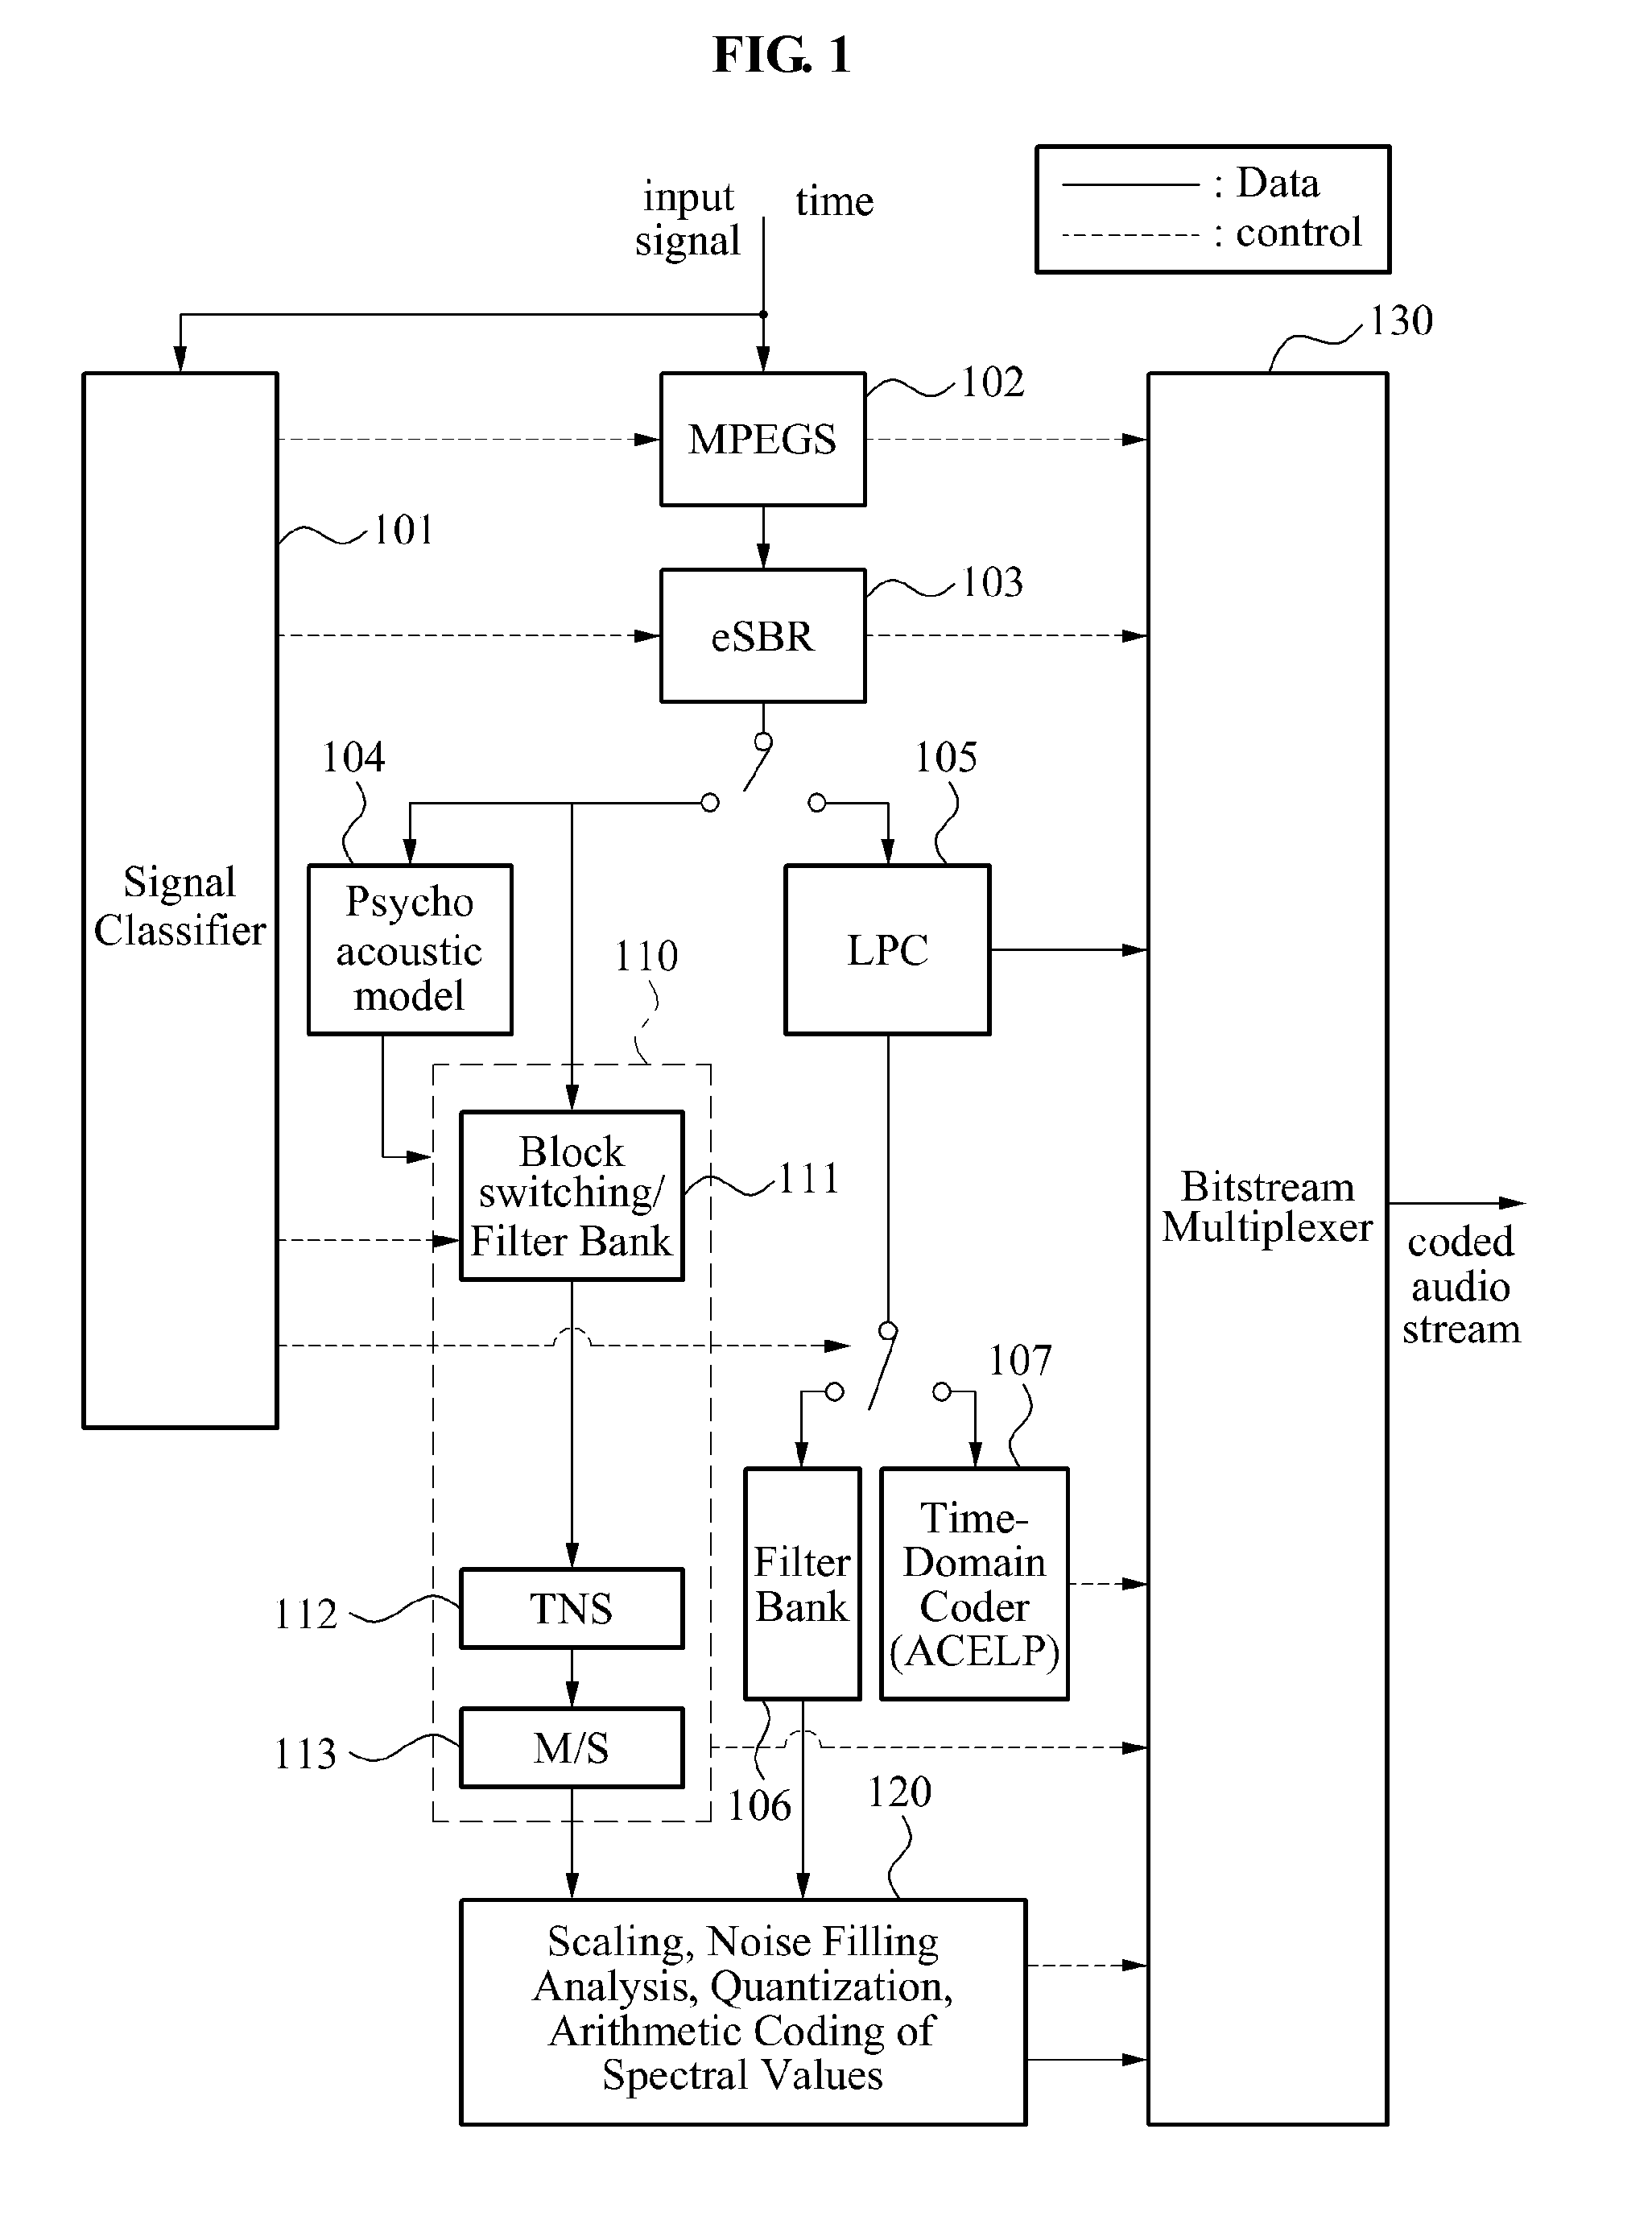 Method for decoding an audio signal based on coding mode and context flag